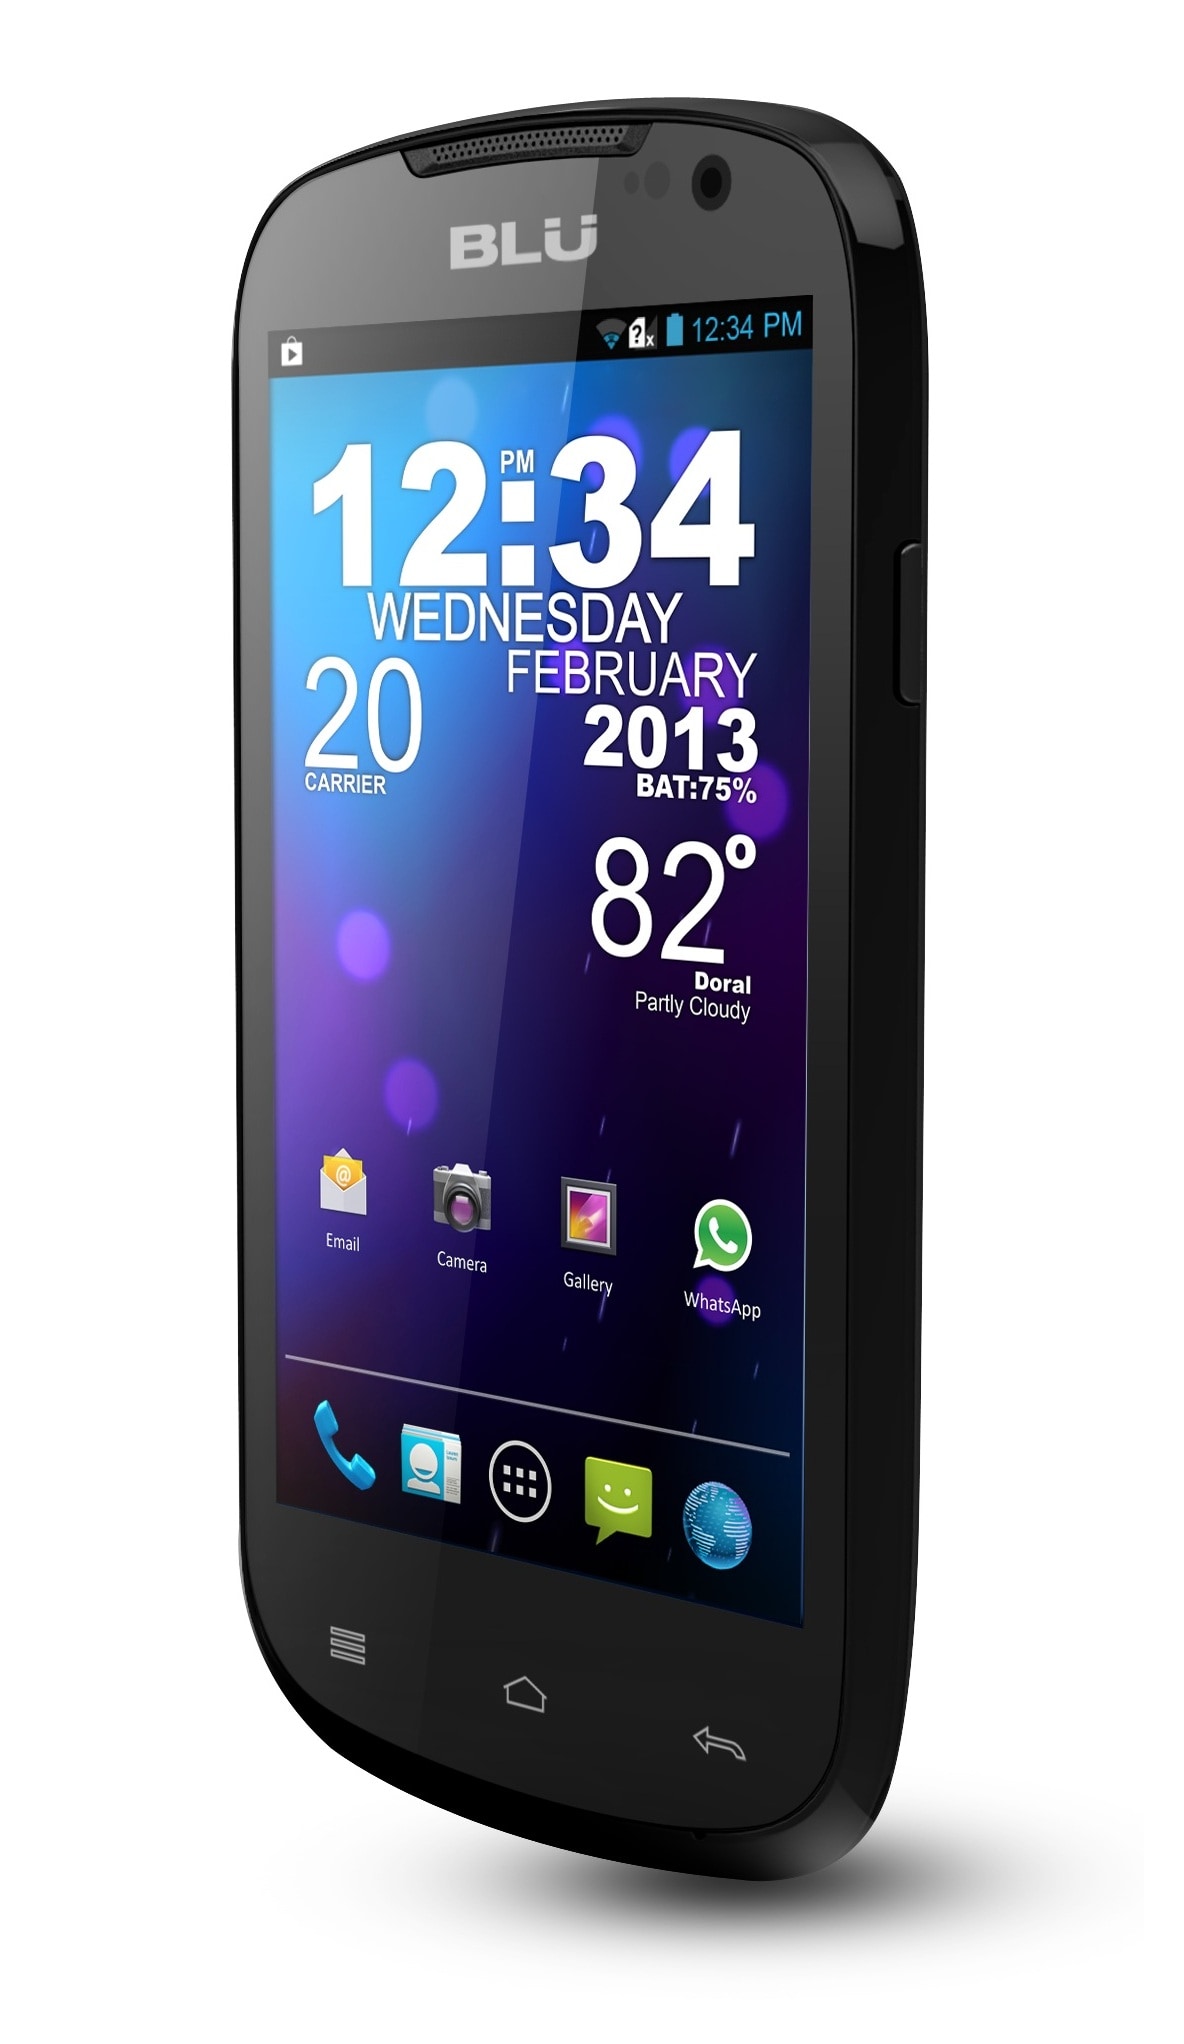 GSM Unlocked Dual SIM Android Cell Phone Today $150.00